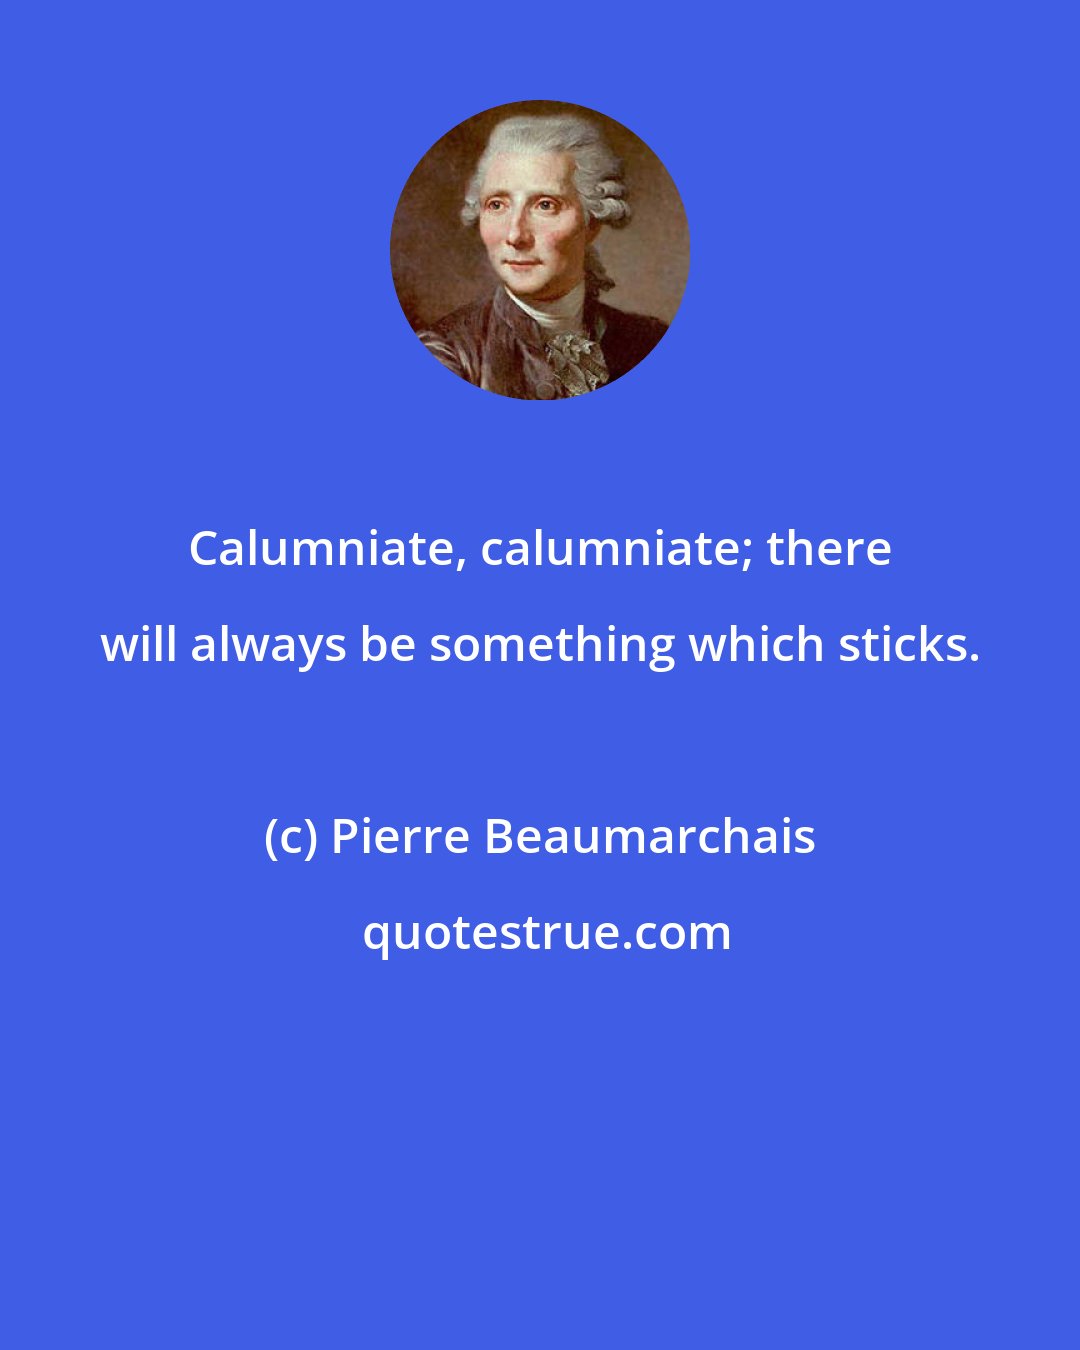 Pierre Beaumarchais: Calumniate, calumniate; there will always be something which sticks.